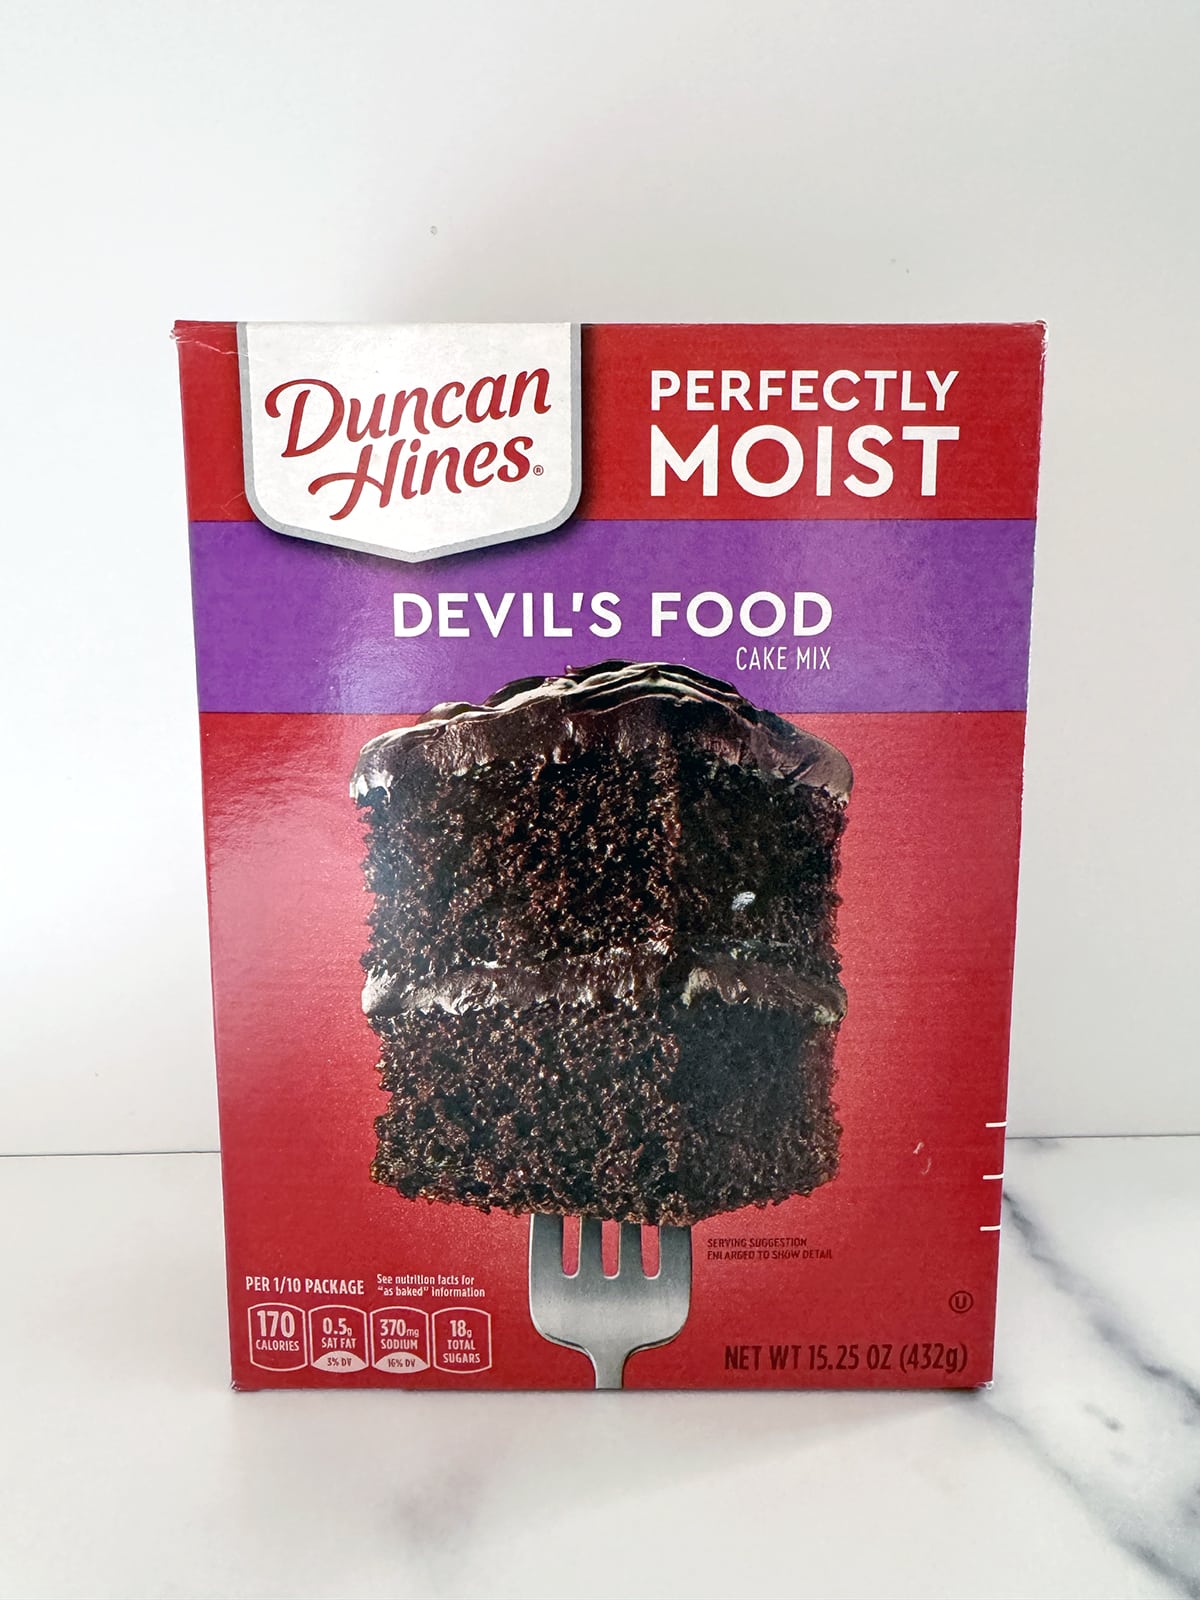 Box of devil's food cake mix from Duncan Hines.